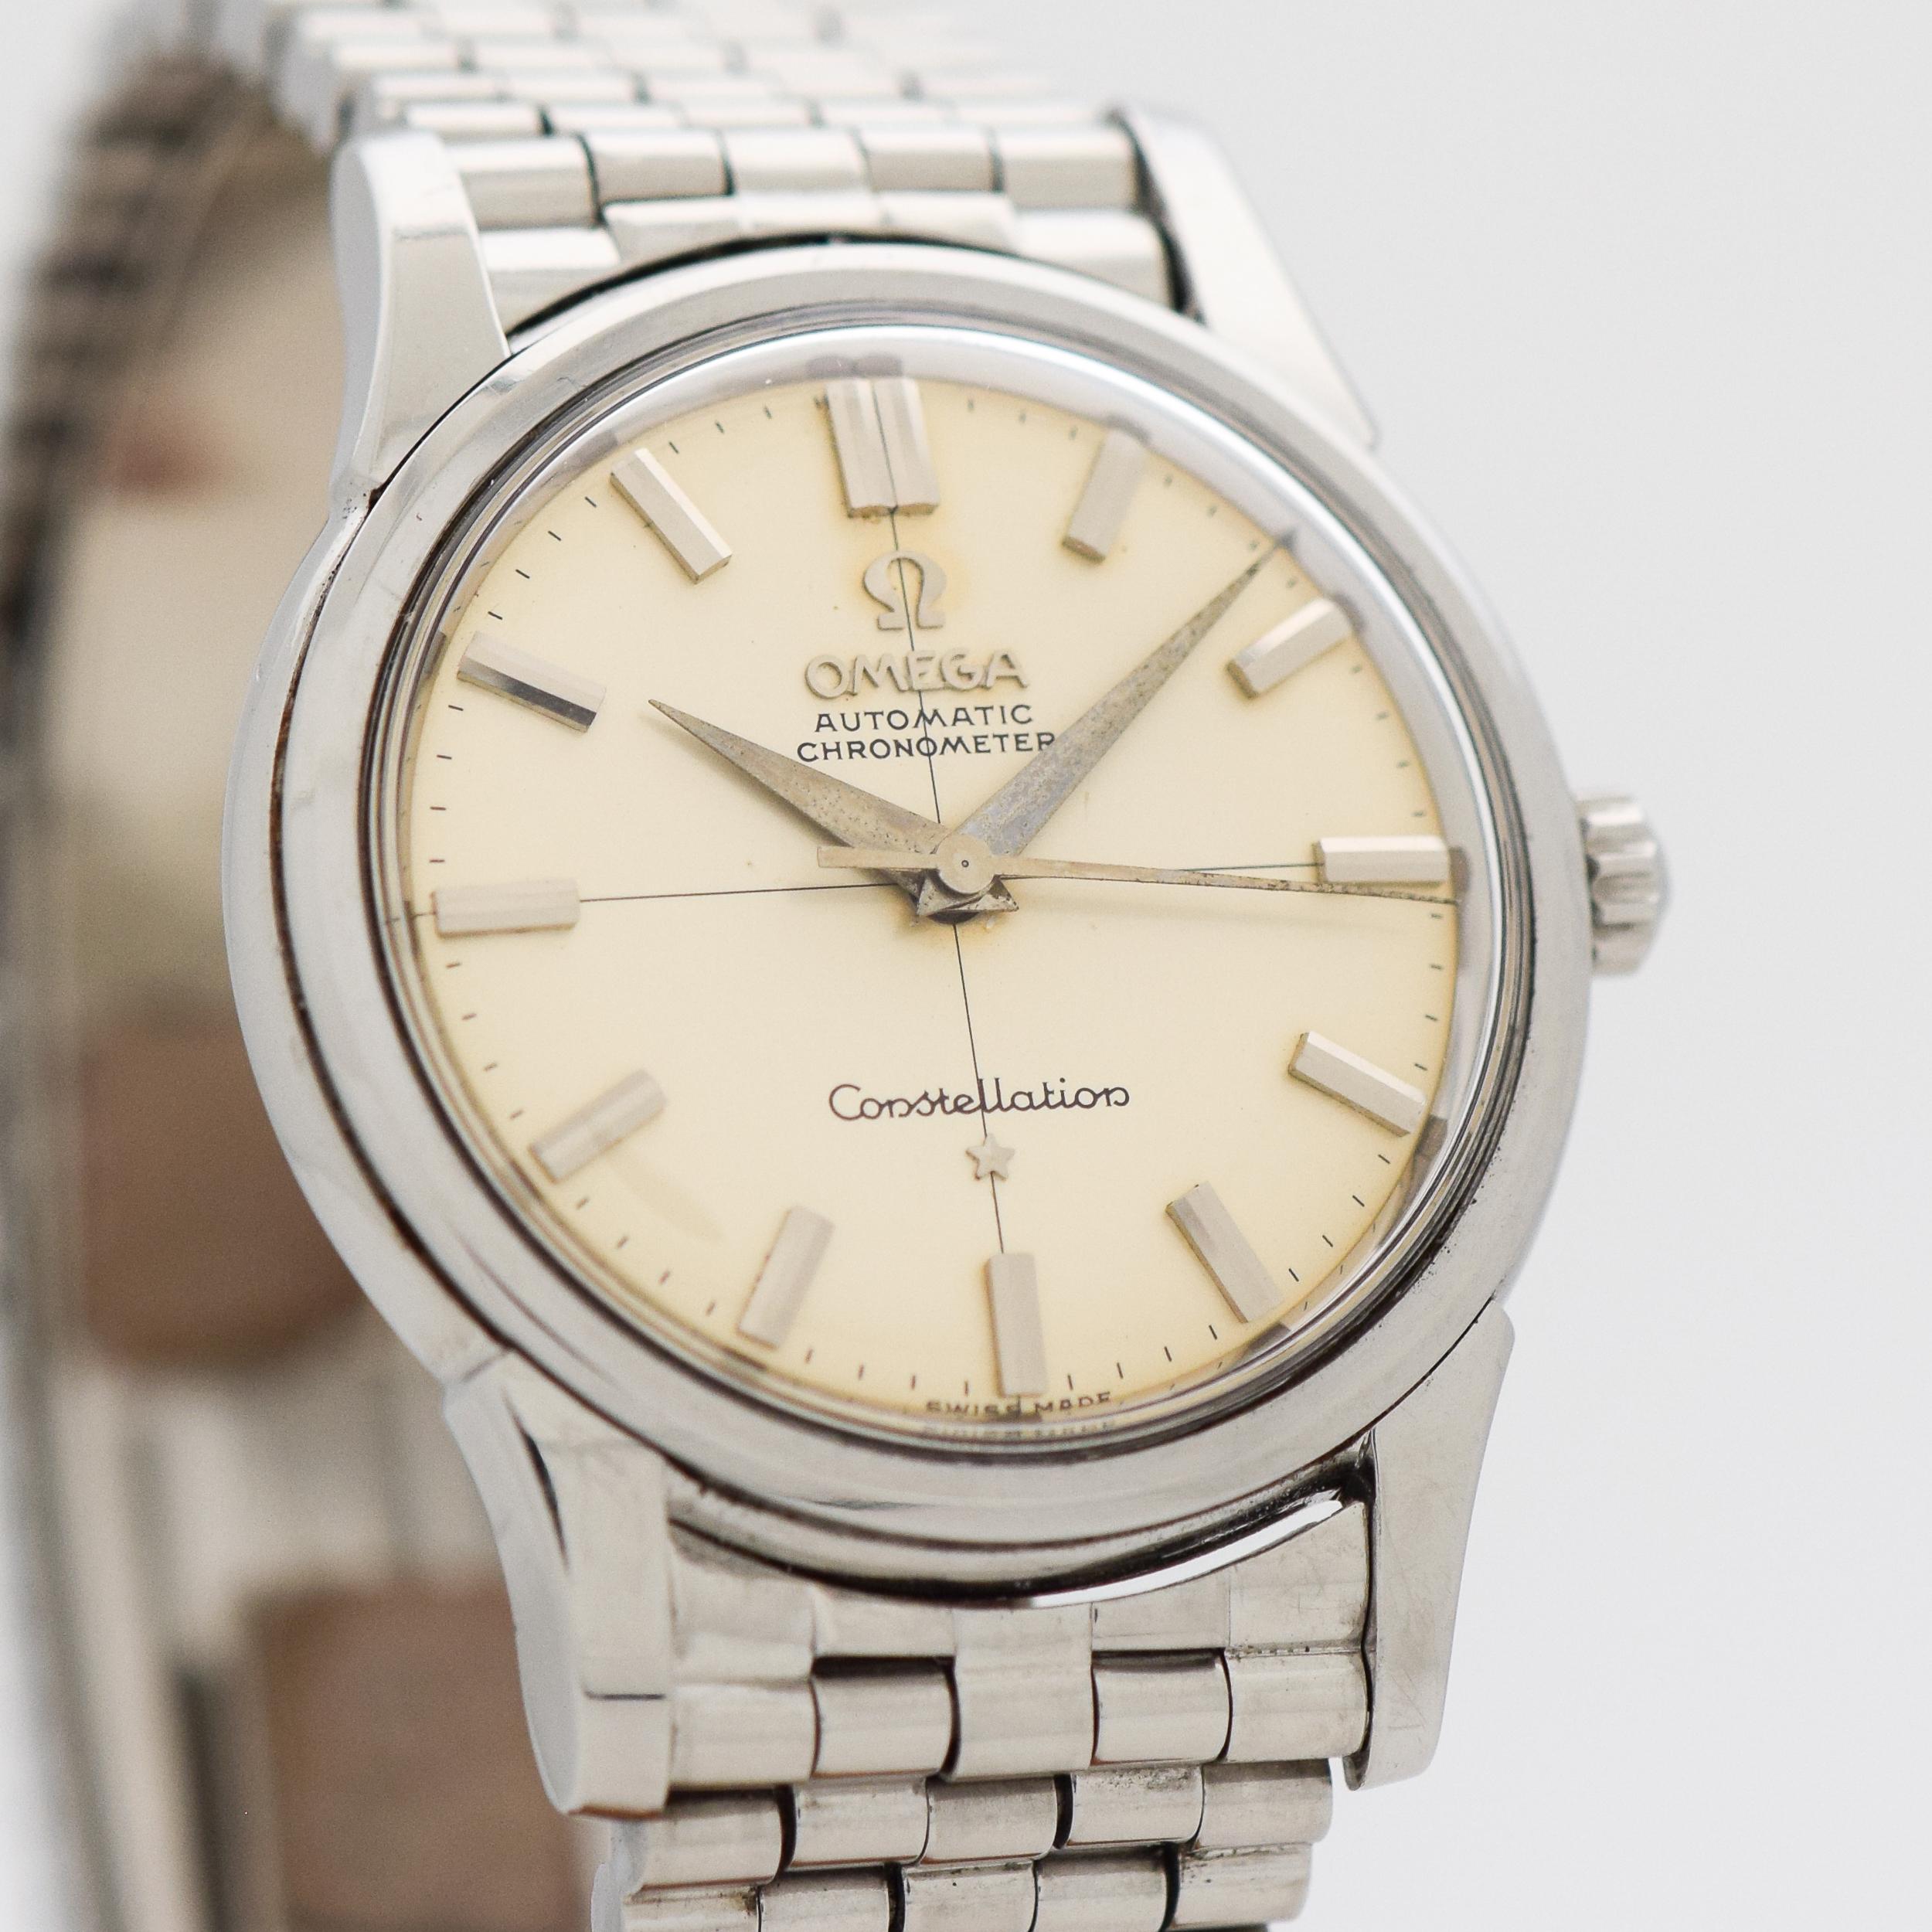 1961 Vintage Omega Constellation Ref. 14381-11-SC Stainless Steel watch with Original Silver Dial with Applied Steel Beveled Bar Markers with Original Omega Stainless Steel Bracelet. 34mm x 43mm lug to lug (1.34 in. x 1.69 in.) - 24 jewel, automatic